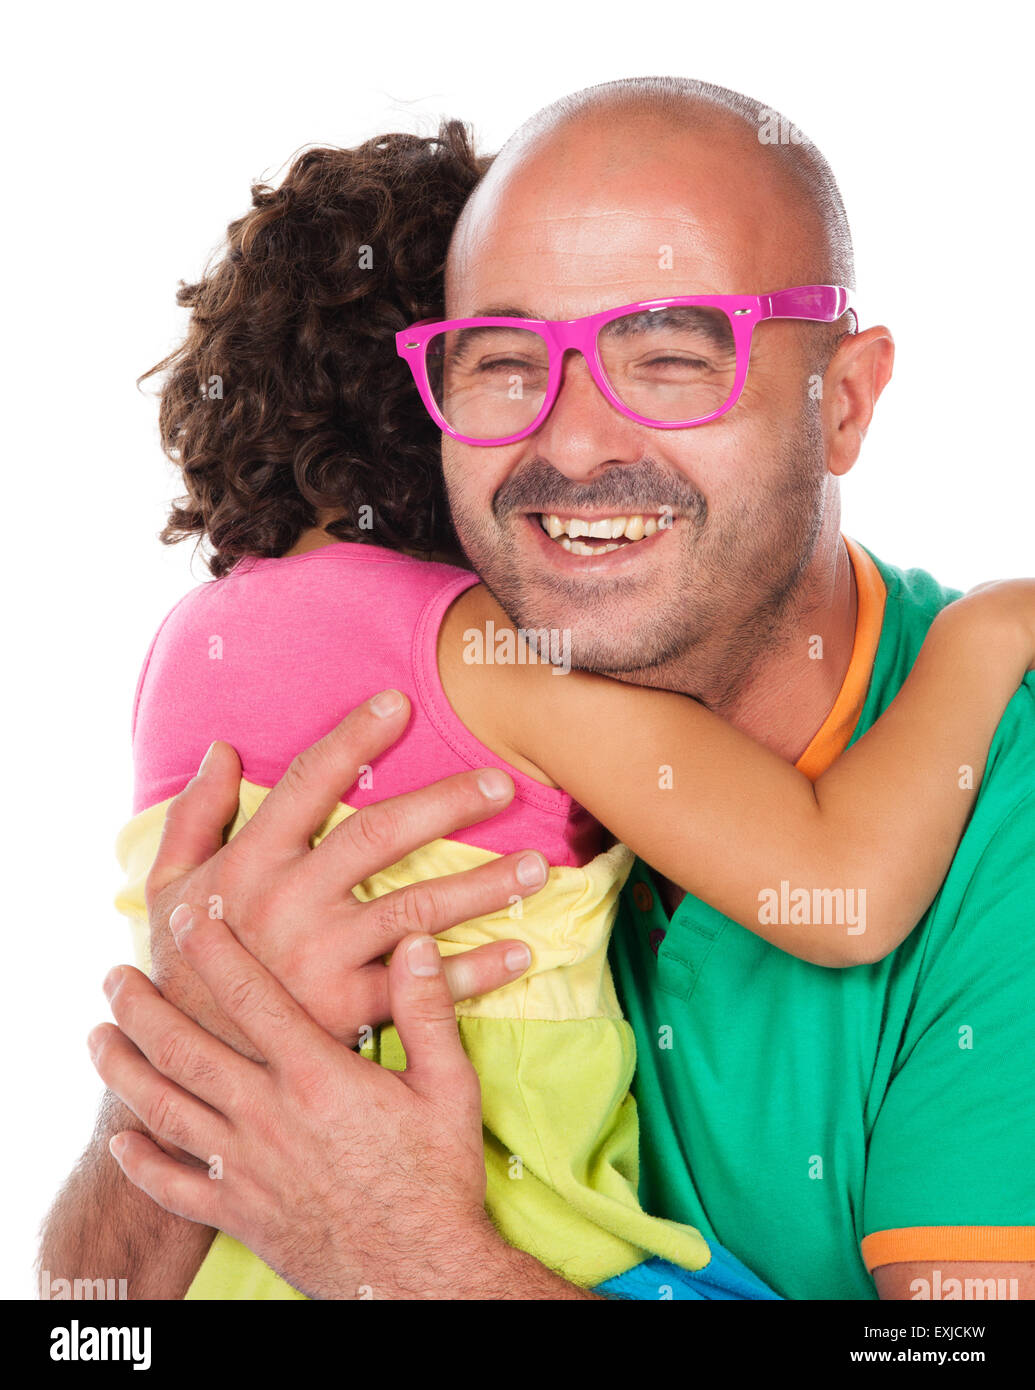 Adorable small caucasian child with curly hair wearing a pink blue and yellow dress. The girl and her father are playing with pi Stock Photo